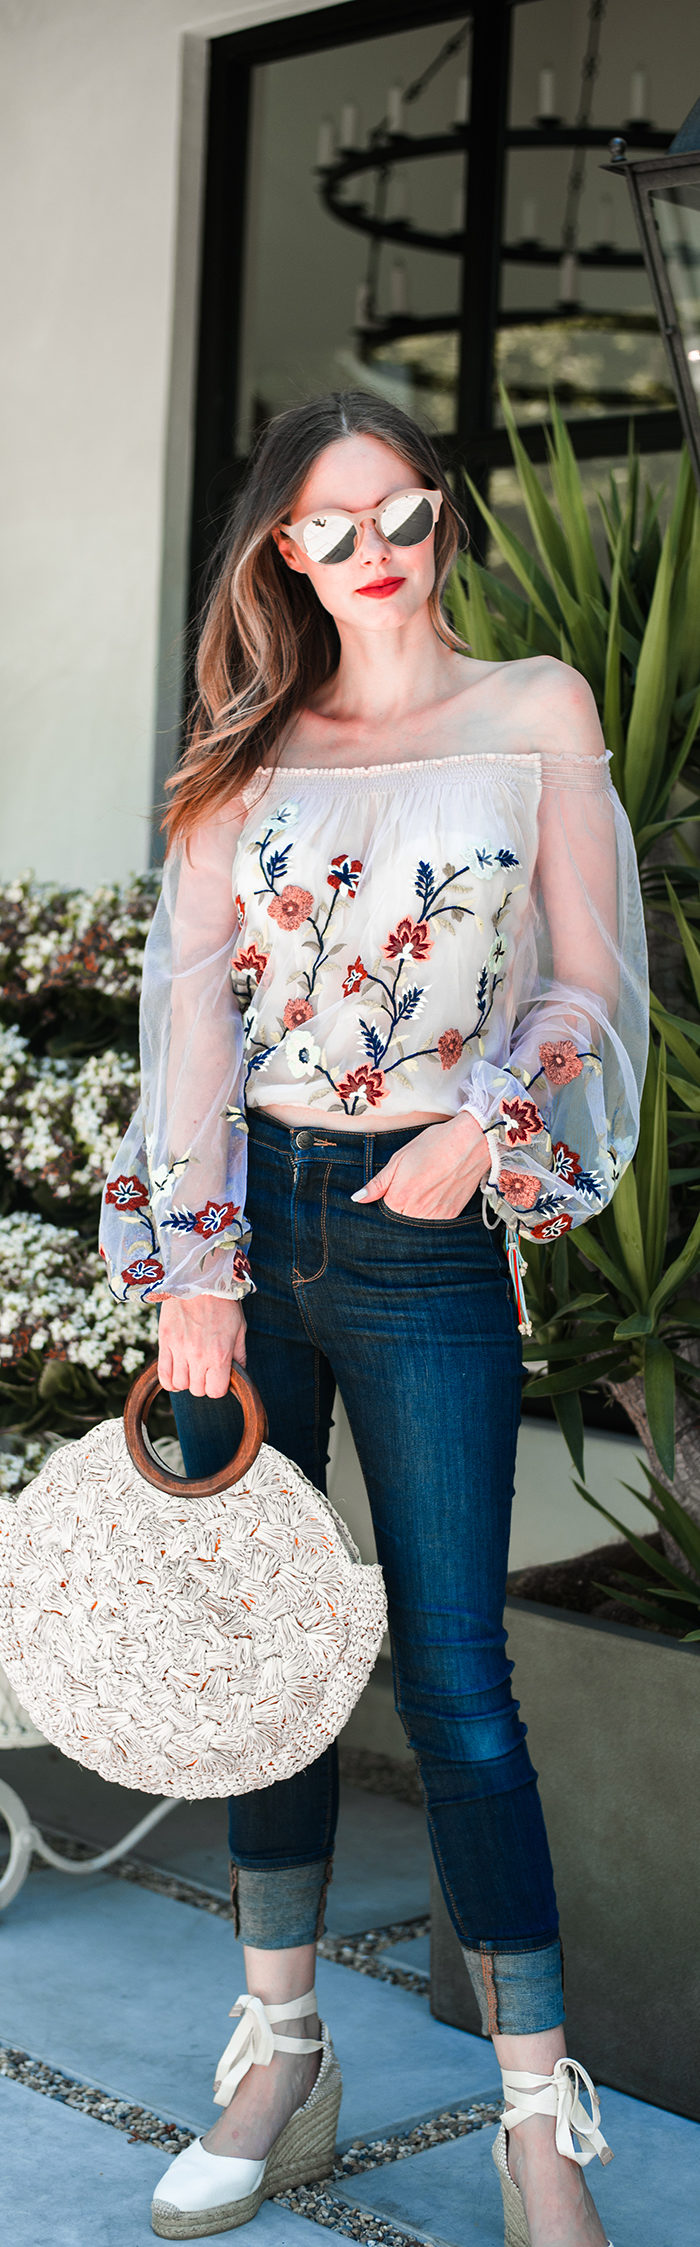 Alyssa Campanella The A List blog first date looks wearing Rococo Sand top and Kayu Coco bag and Castaner Carina wedges